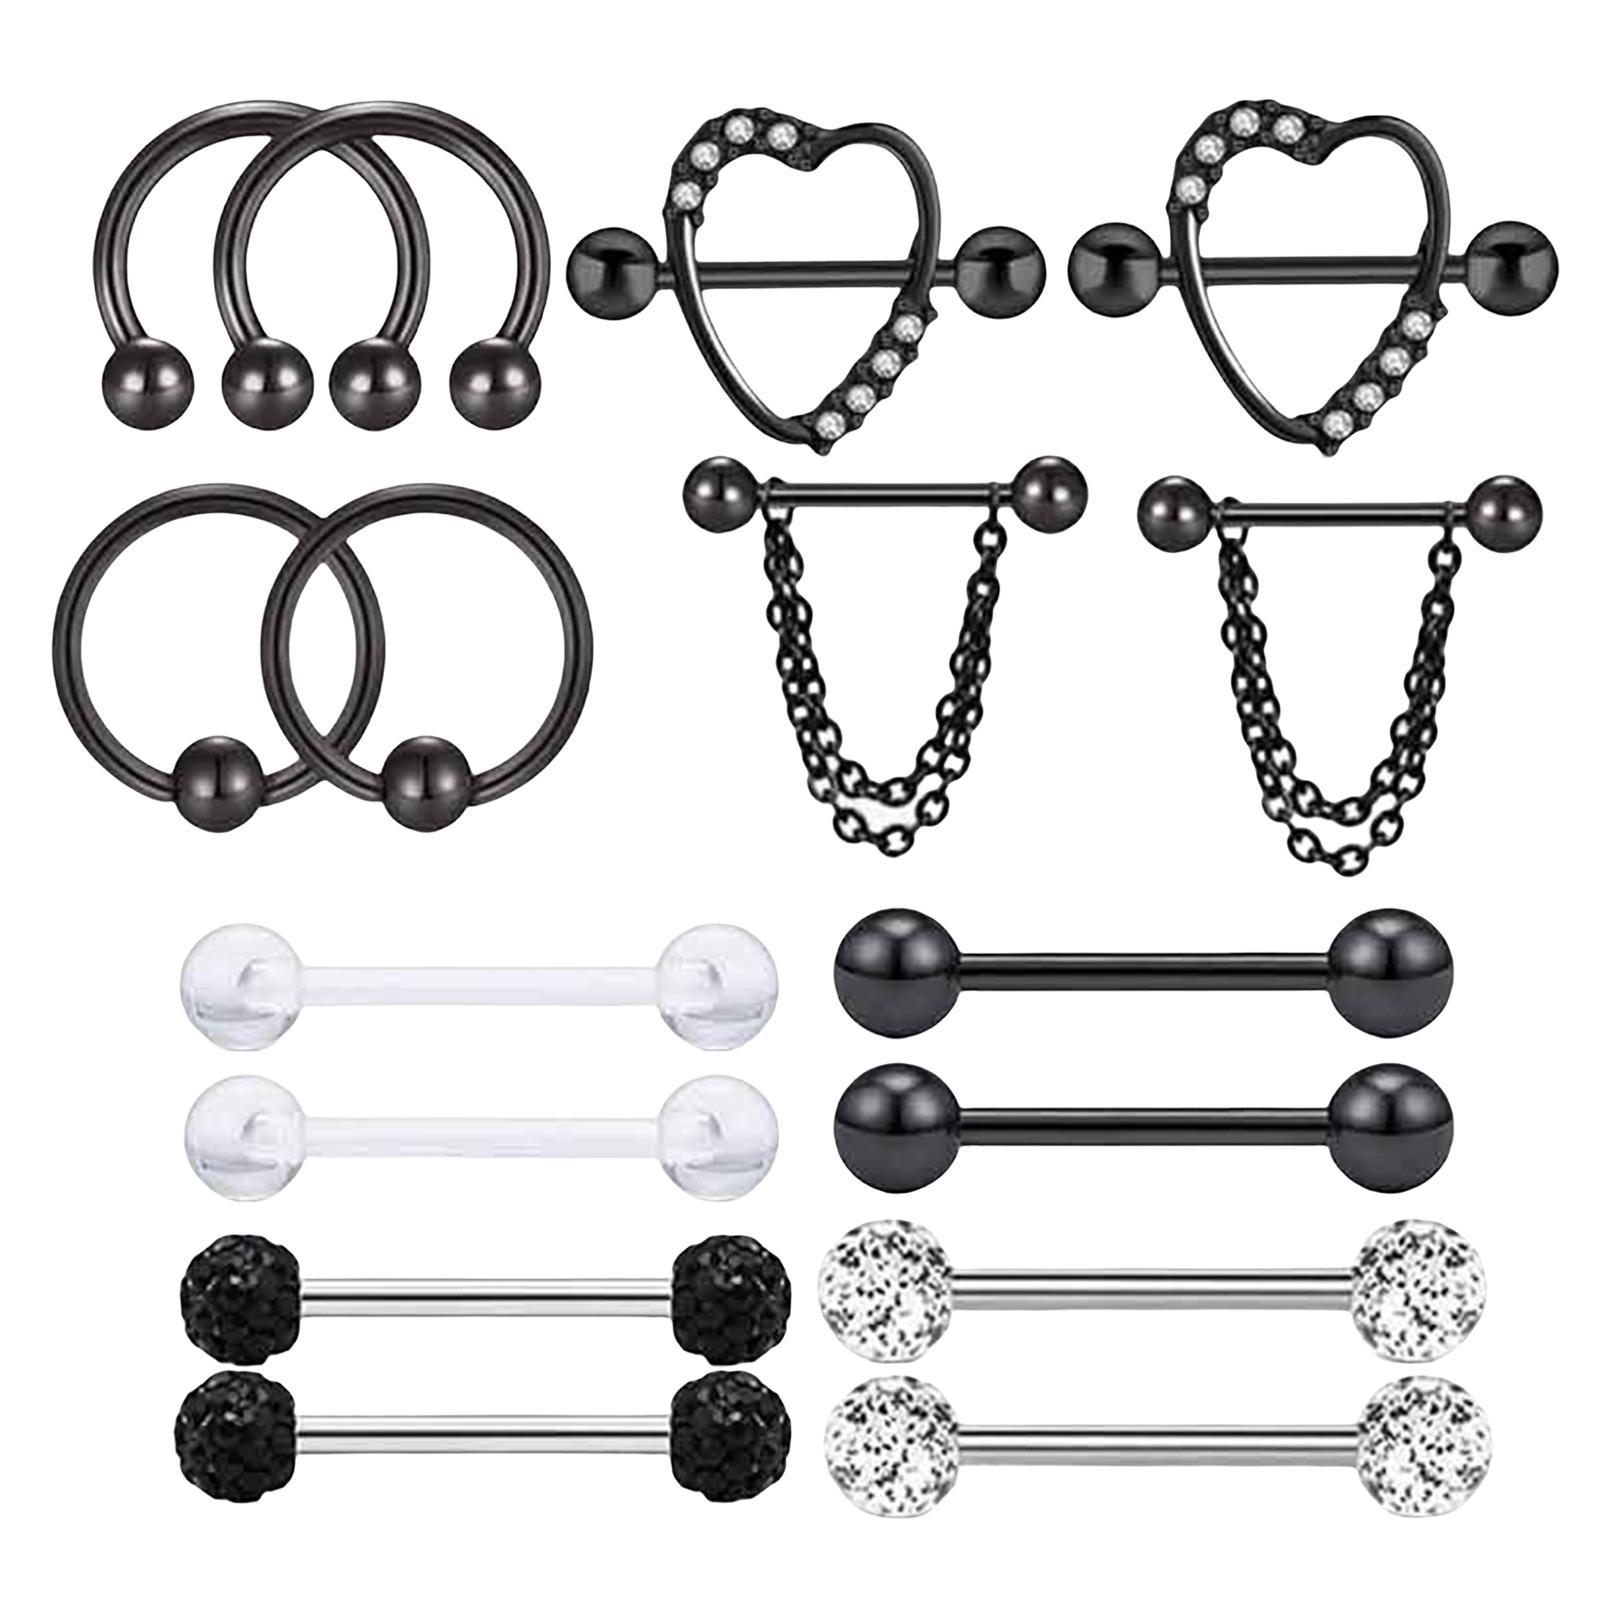 8 Pairs Pierced Body Jewelry Barbell Pierced Bar Stainless Steel for Women